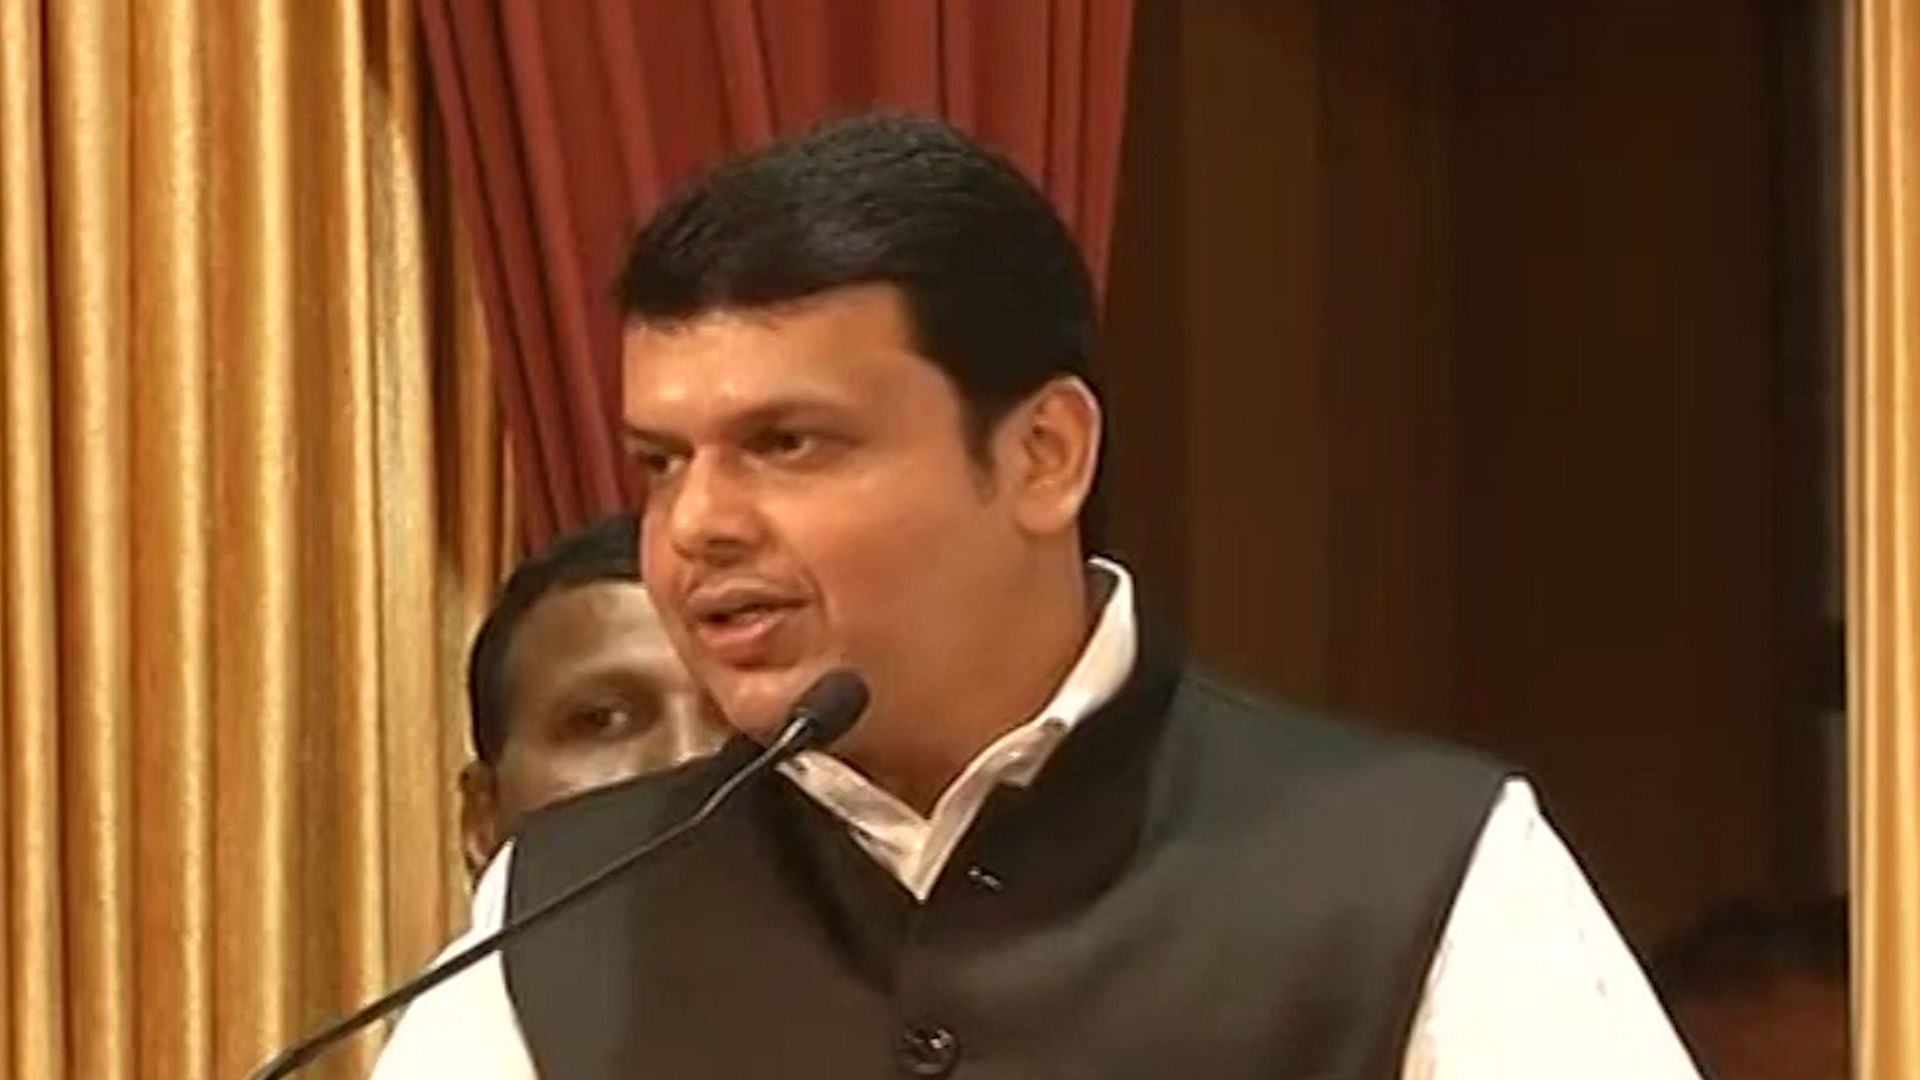 Maharashtra Chief Minister Devendra Fadnavis wants new policy for open-air rooftop restaurants and food trucks in Mumbai.